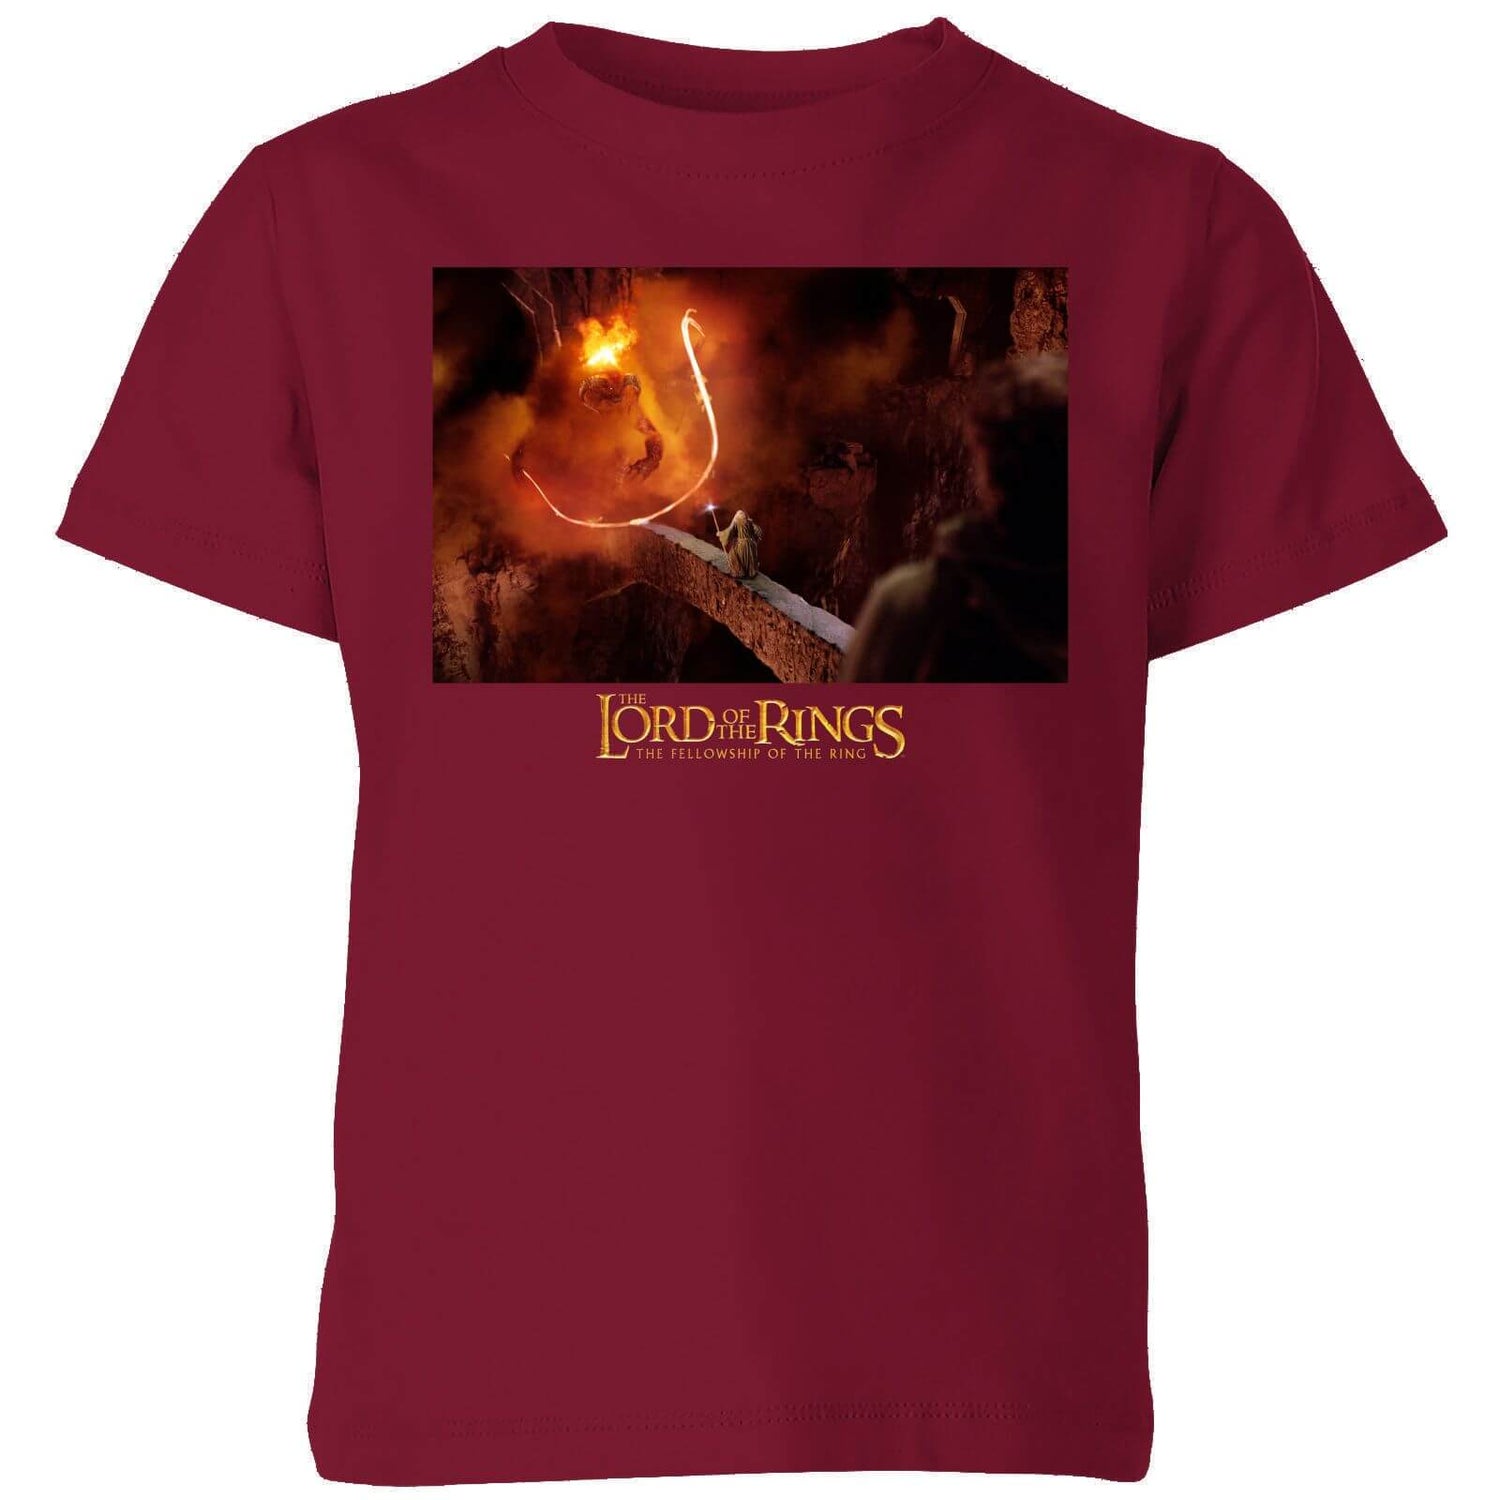 Lord Of The Rings You Shall Not Pass Kids' T-Shirt - Burgundy